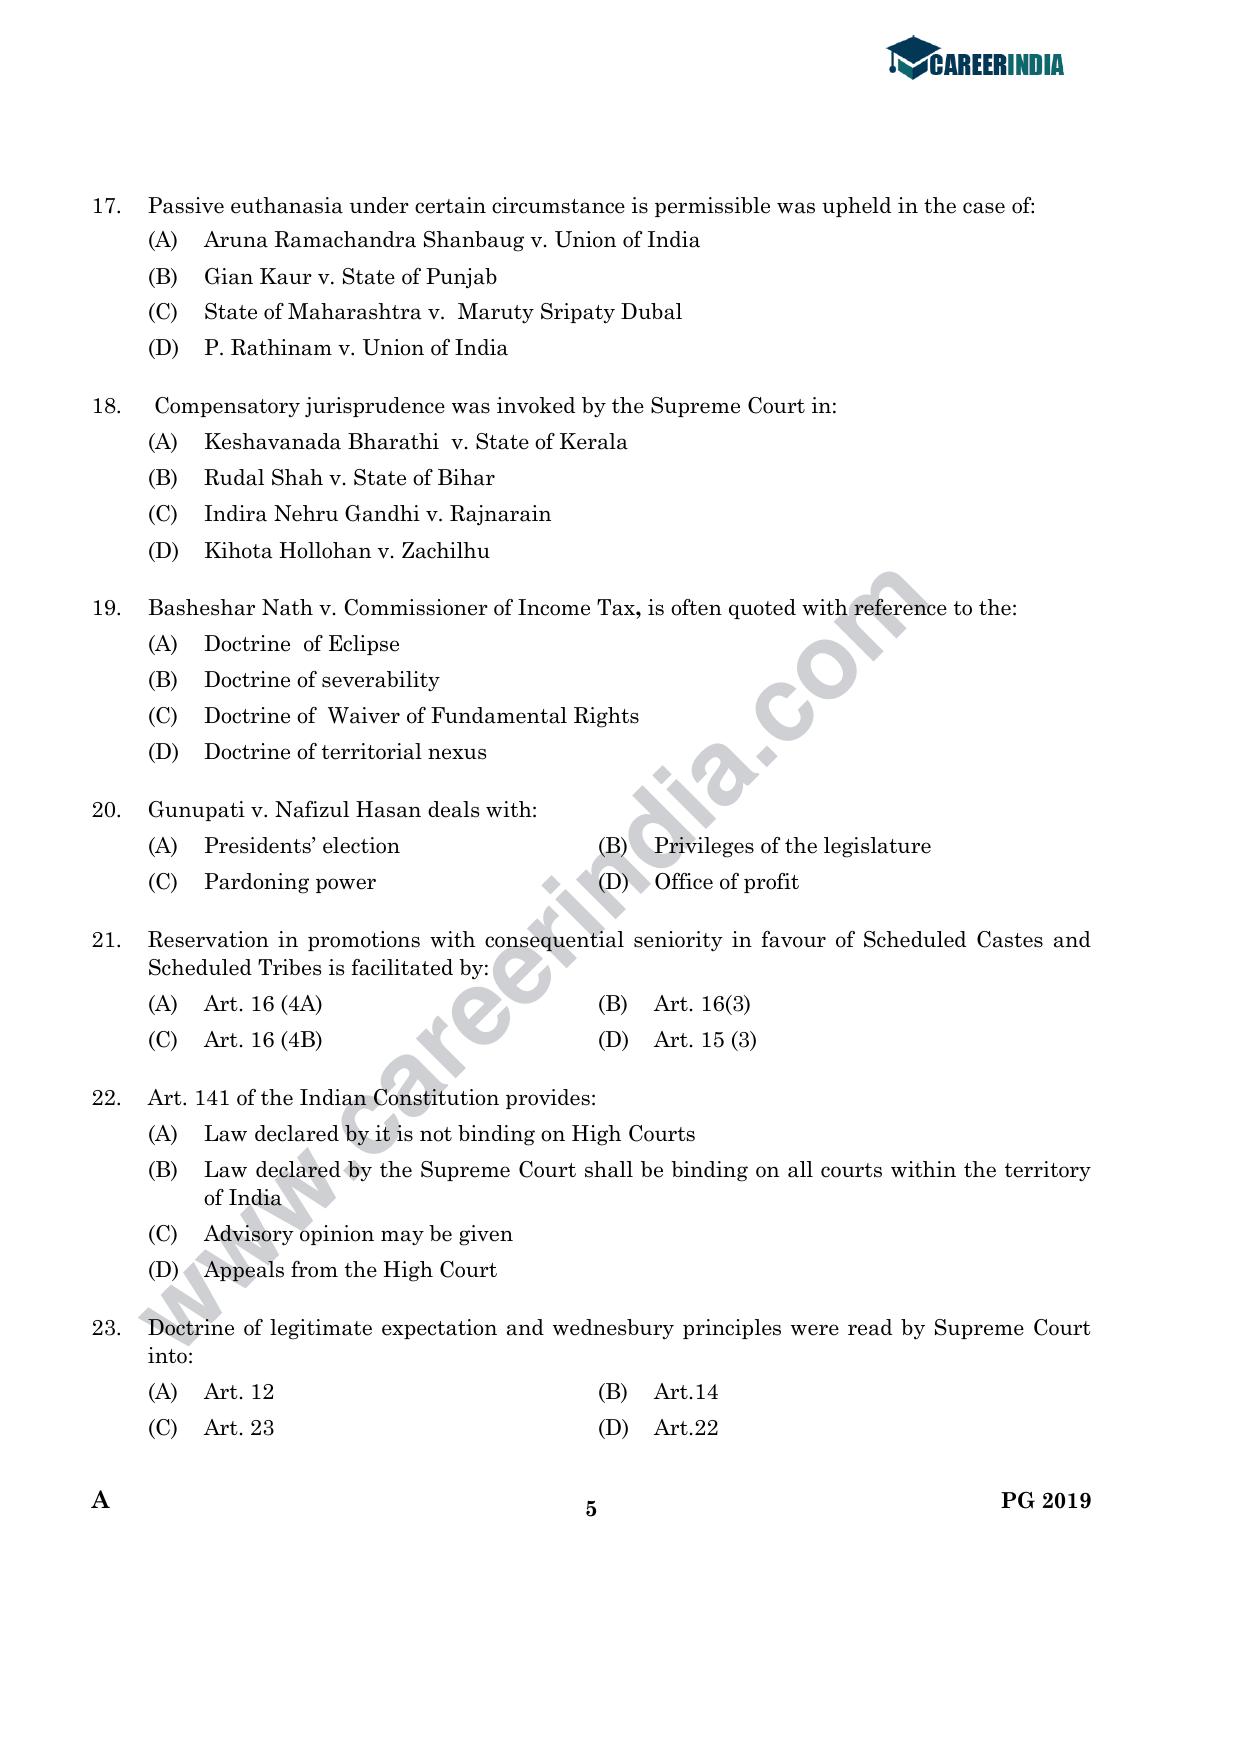 CLAT 2019 PG A-Series Question Papers (C.L.A.) - Page 4